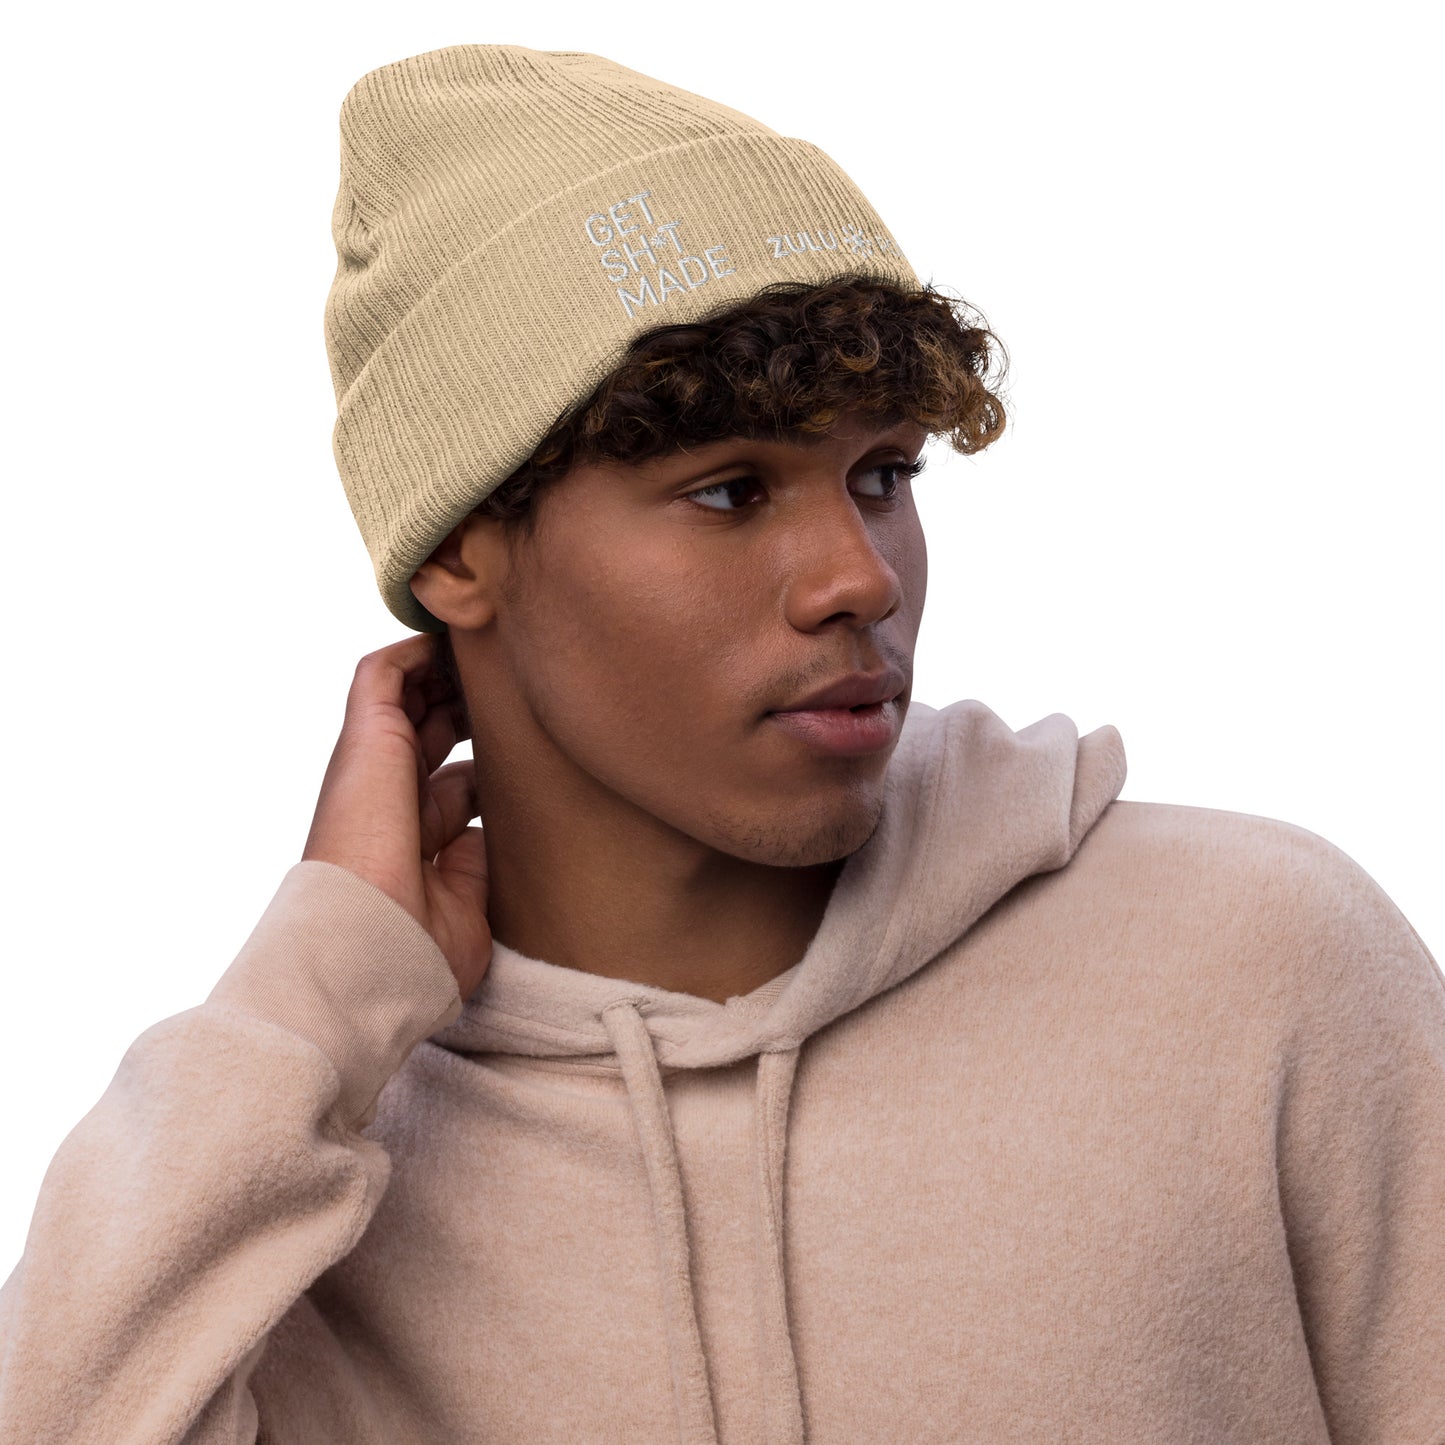 Get Sh*t Made Ribbed Knit Beanie